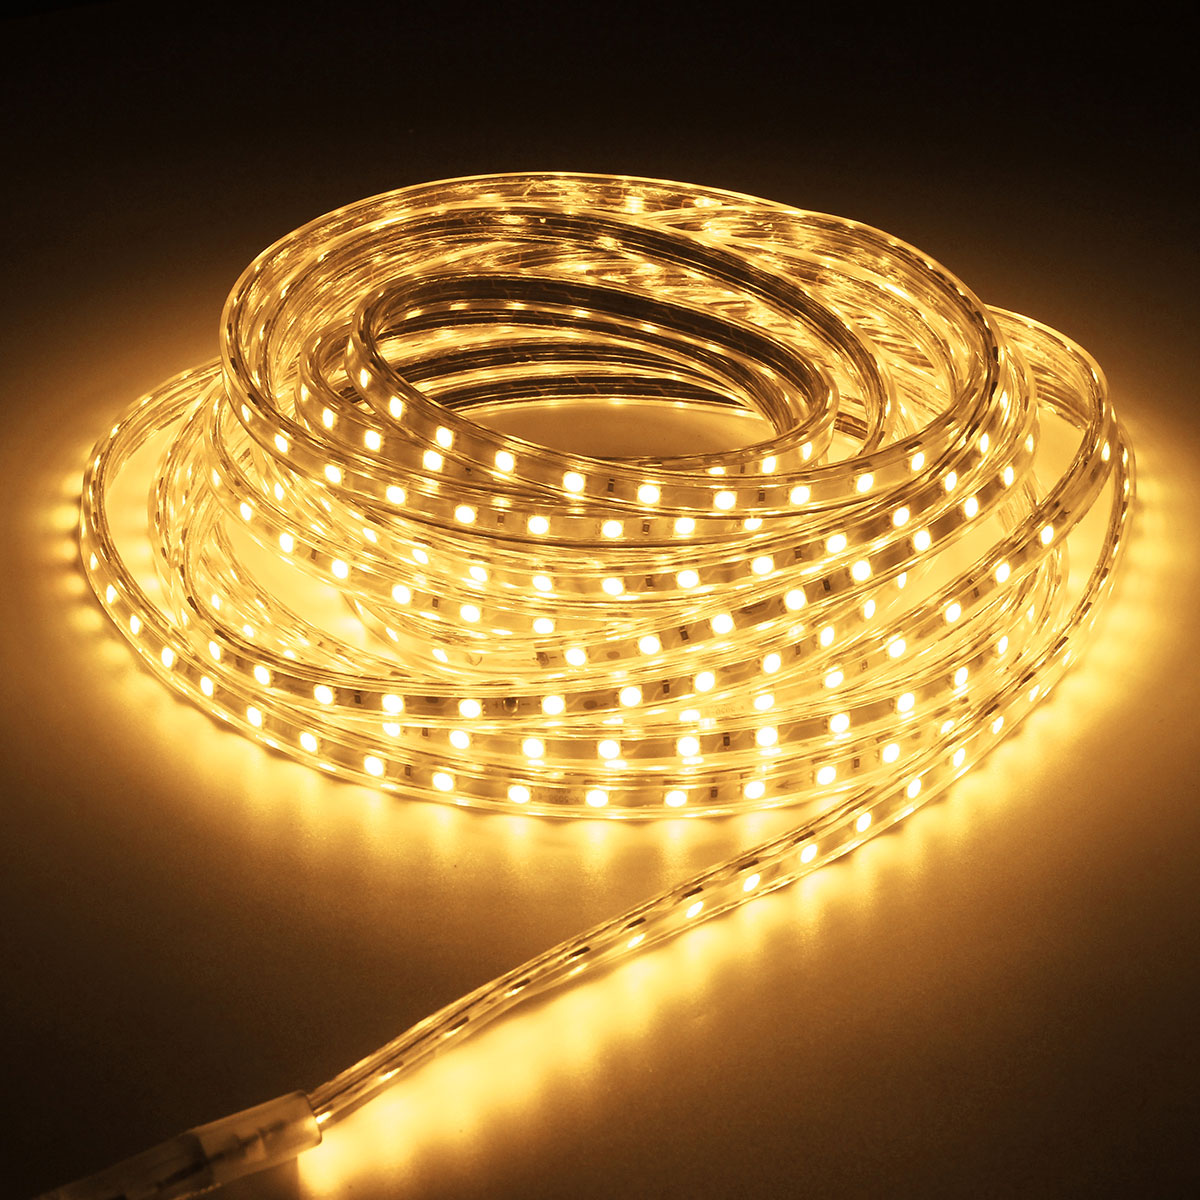 8M-5050-LED-SMD-Outdoor-Waterproof-Flexible-Tape-Rope-Strip-Light-Xmas-220V-1066360-6